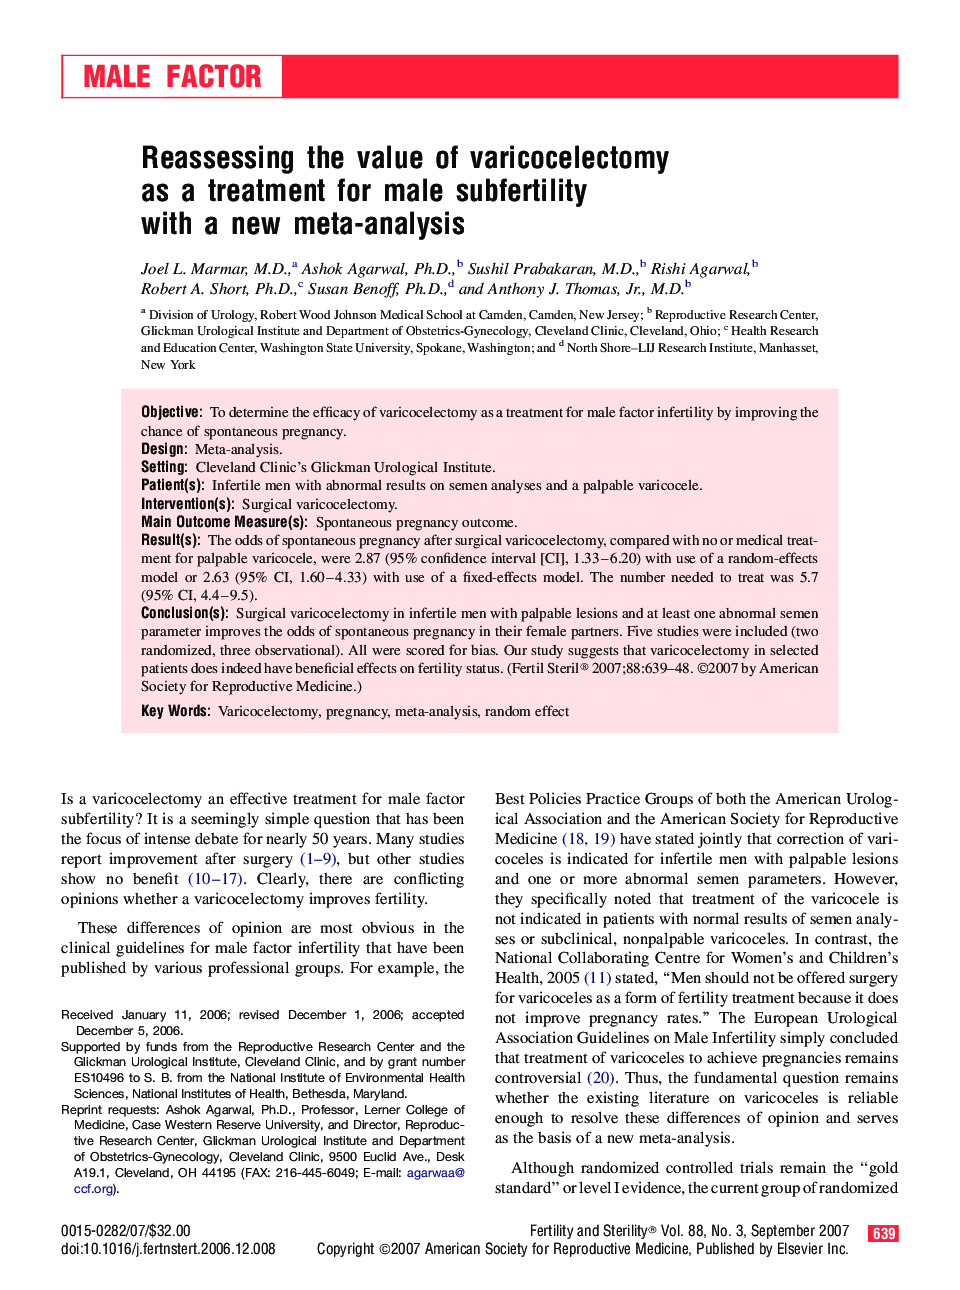 Reassessing the value of varicocelectomy as a treatment for male subfertility with a new meta-analysis 